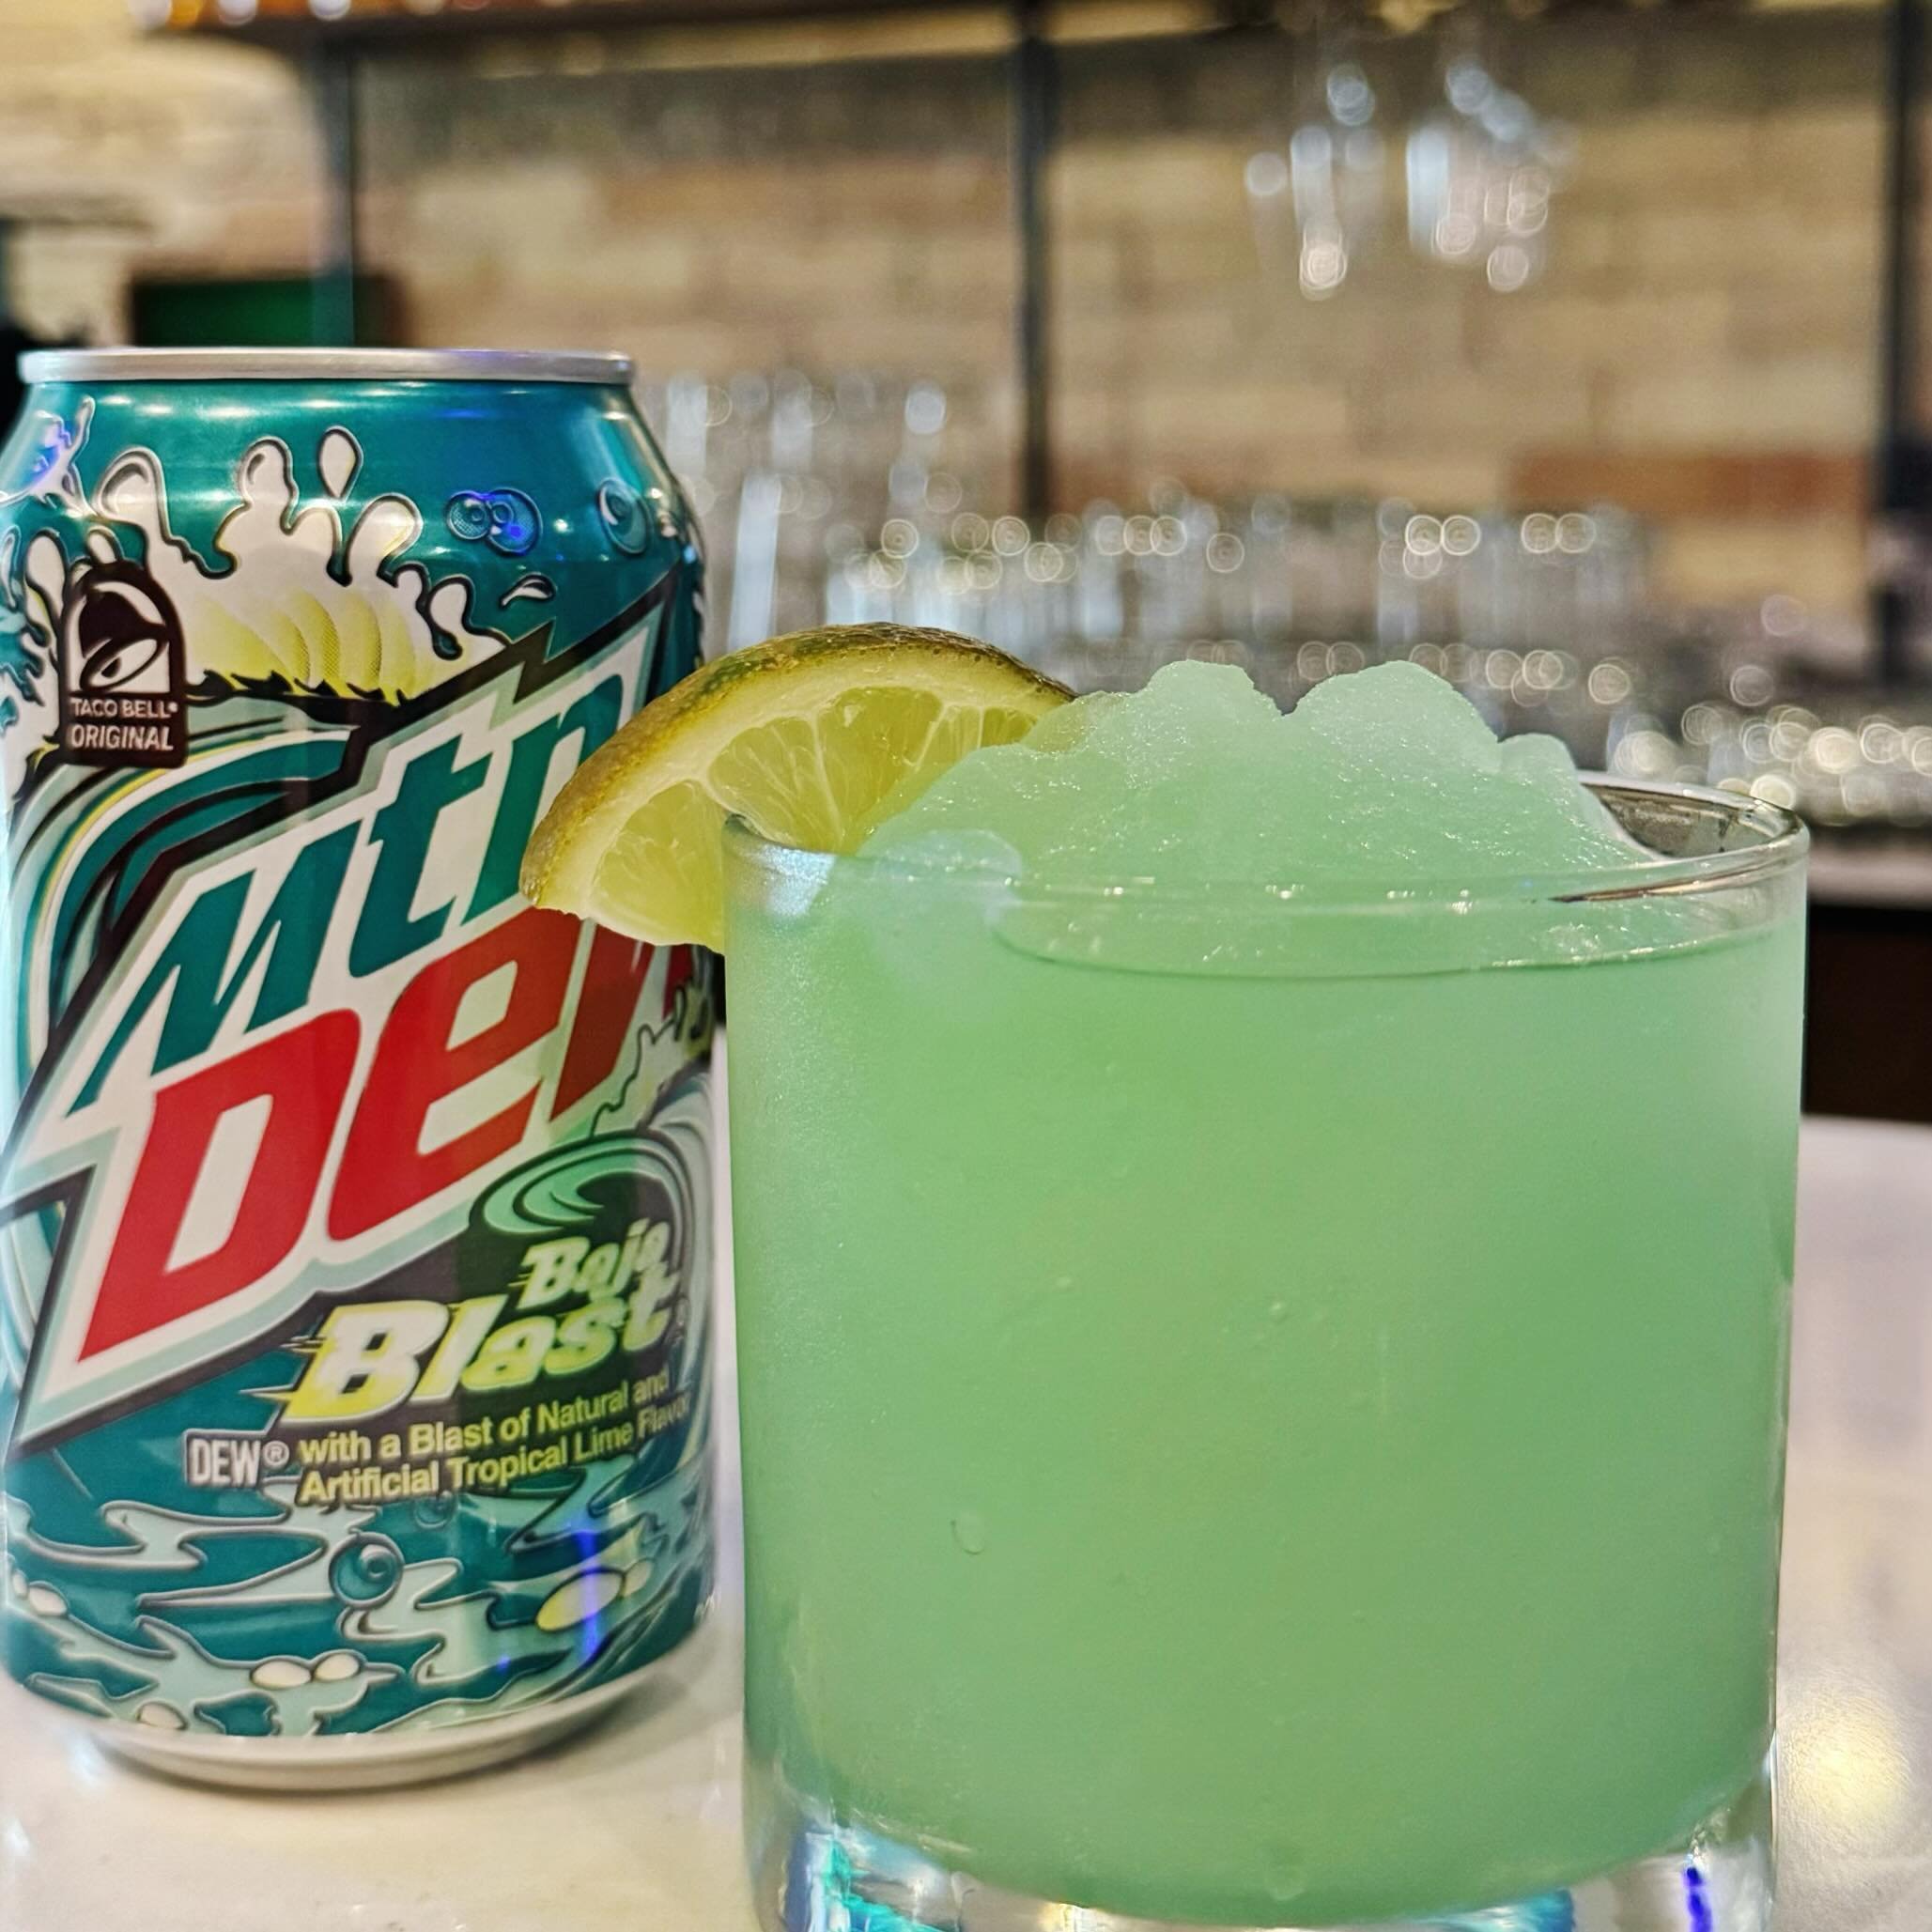 Skip the margarita. Come get our Baja Blast slushy! 

Made with @nosotros tequila. See you today!